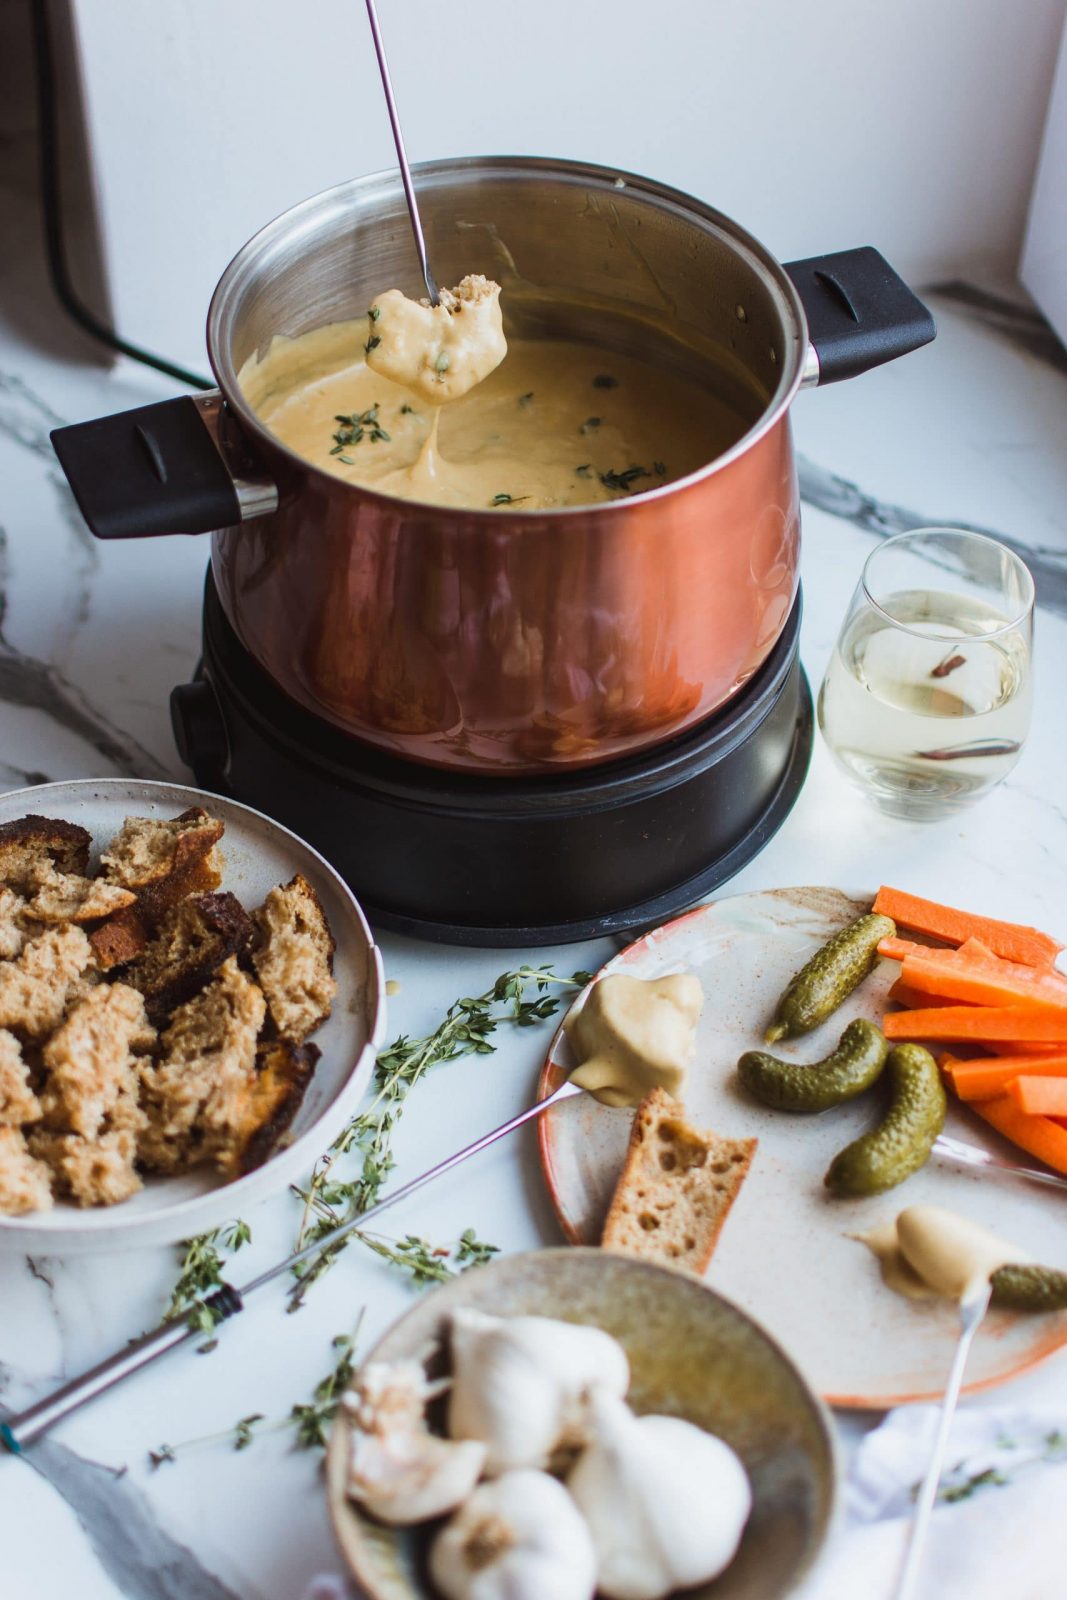 15 AMAZING Fondue Recipes for the Ultimate Evening In - The Cards We Drew